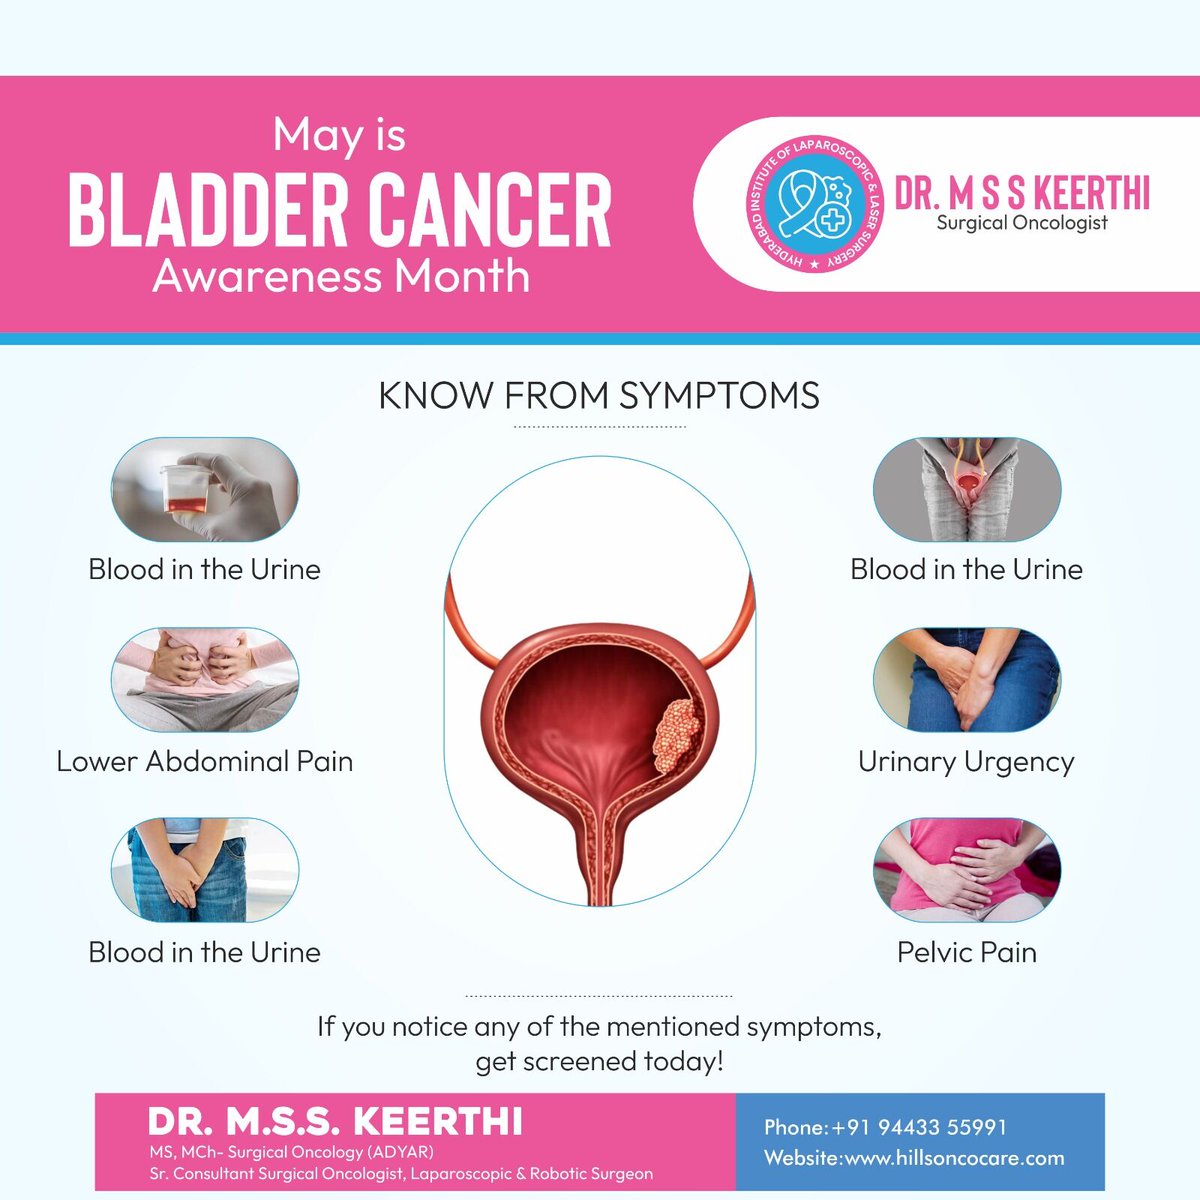 Spread #BLADDERCANCER awareness this May! Look for signs like blood in urine, abdominal or pelvic pain, urinary urgency. Early detection saves lives! 

#CancerCare #drmsskeerthi #oncologist #roboticsurgeon #cancerspecialist #Hyderabad #Secunderabad #BladderCancerAwareness